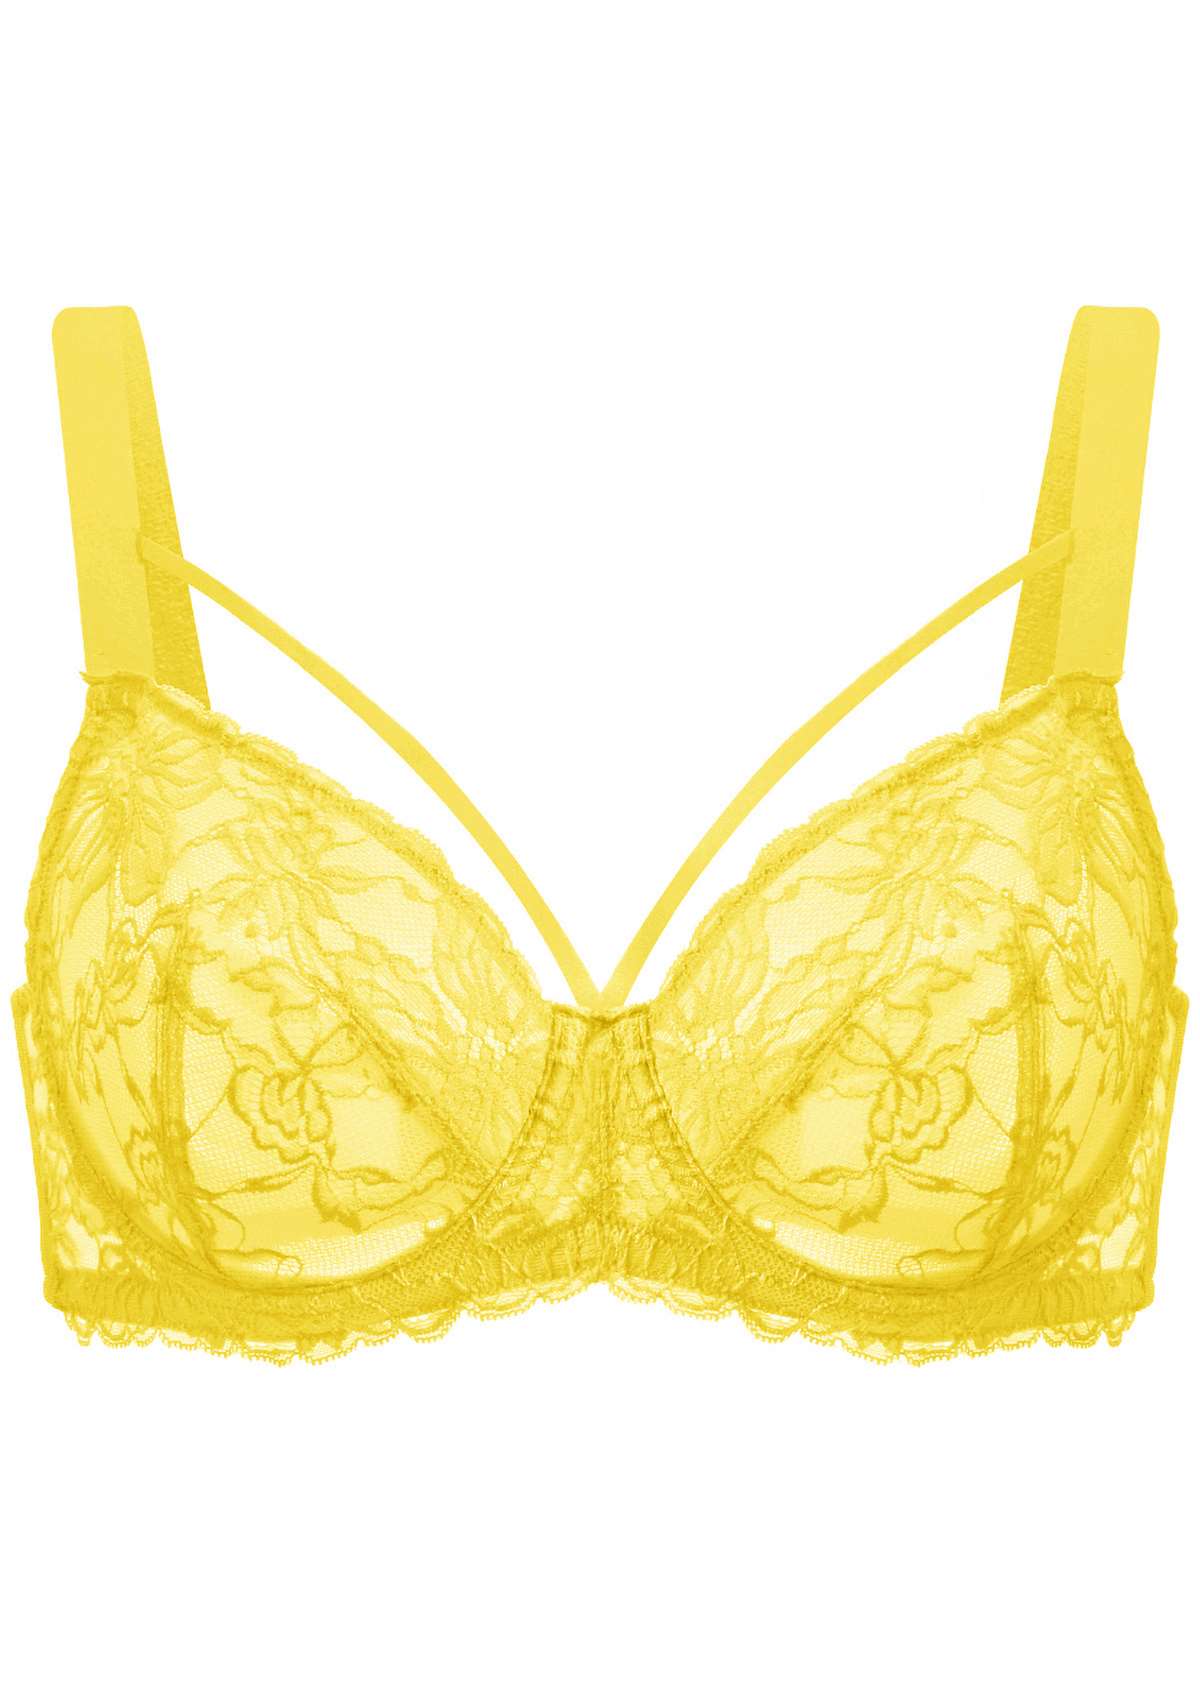 HSIA Unlined Lace Mesh Minimizer Bra For Large Breasts, Full Coverage - Bright Yellow / 44 / G